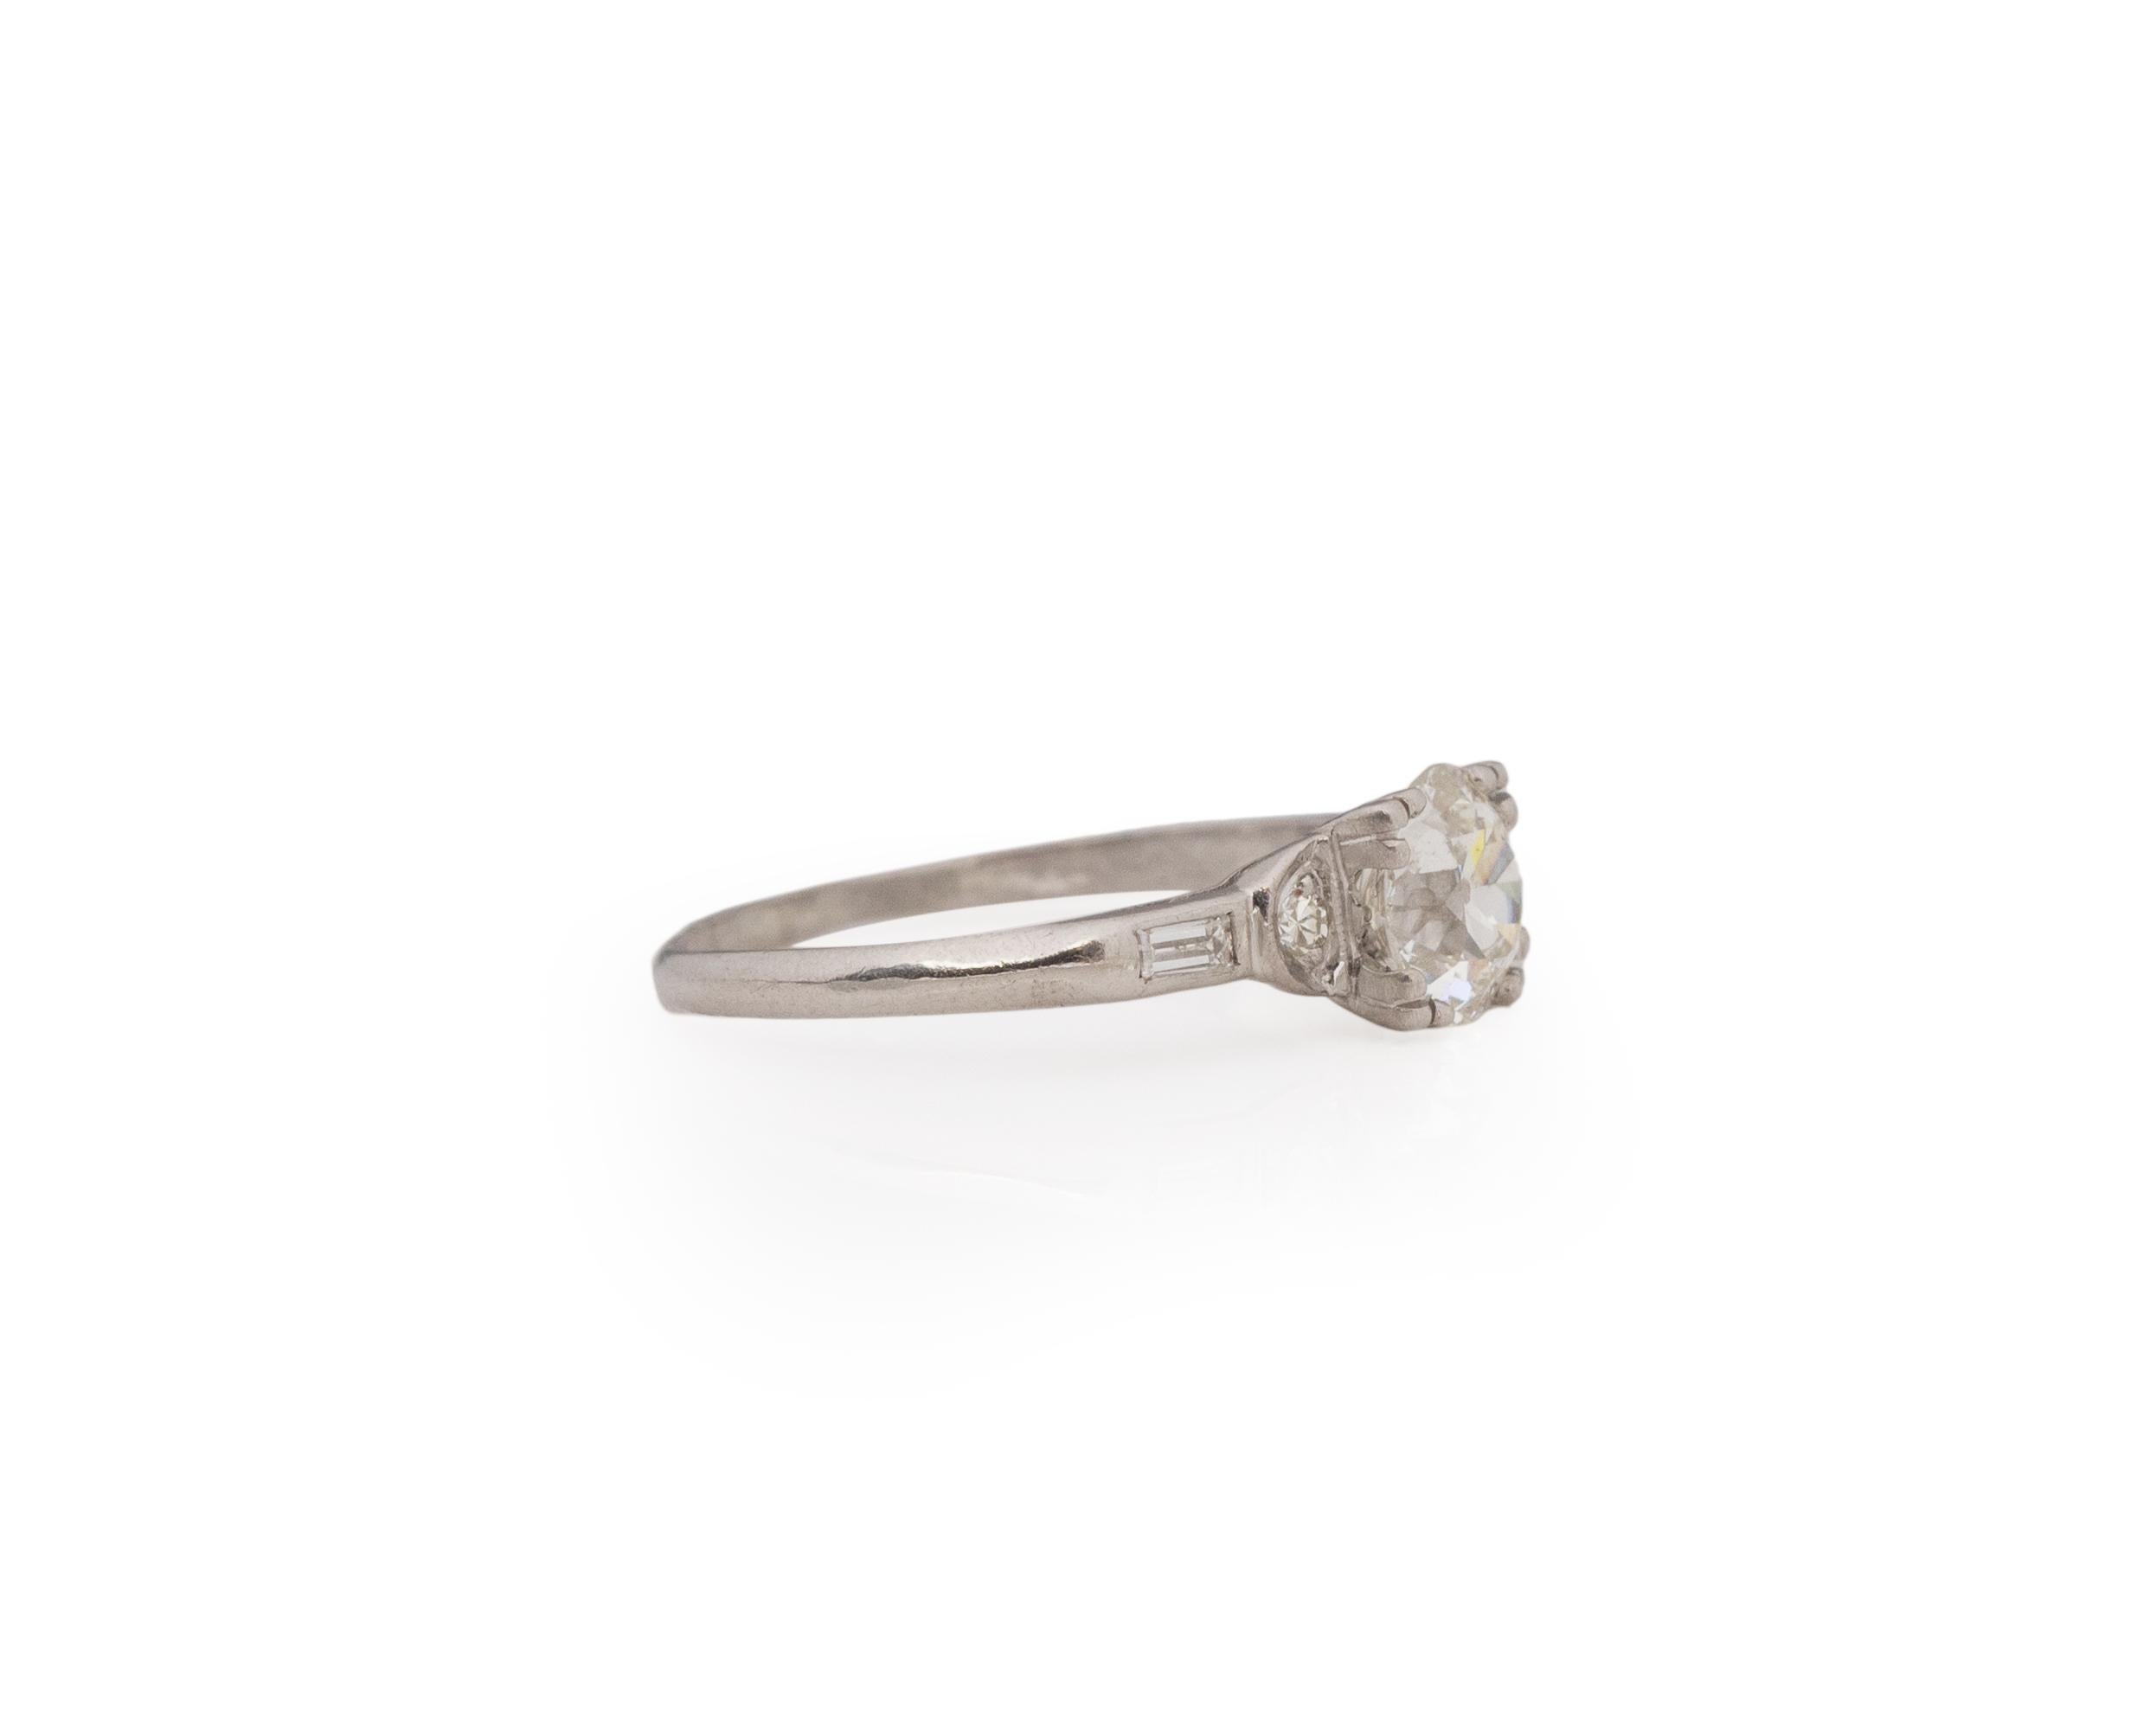 Ring Size: 5.75
Metal Type: Platinum [Hallmarked, and Tested]
Weight: 2.31 grams

Center Diamond Details:
GIA REPORT #:6227025543
Weight: .87ct
Cut: Old European brilliant
Color: J
Clarity: VS2
Measurements: 6.25mm x 6.00mm x 3.61mm

Finger to Top